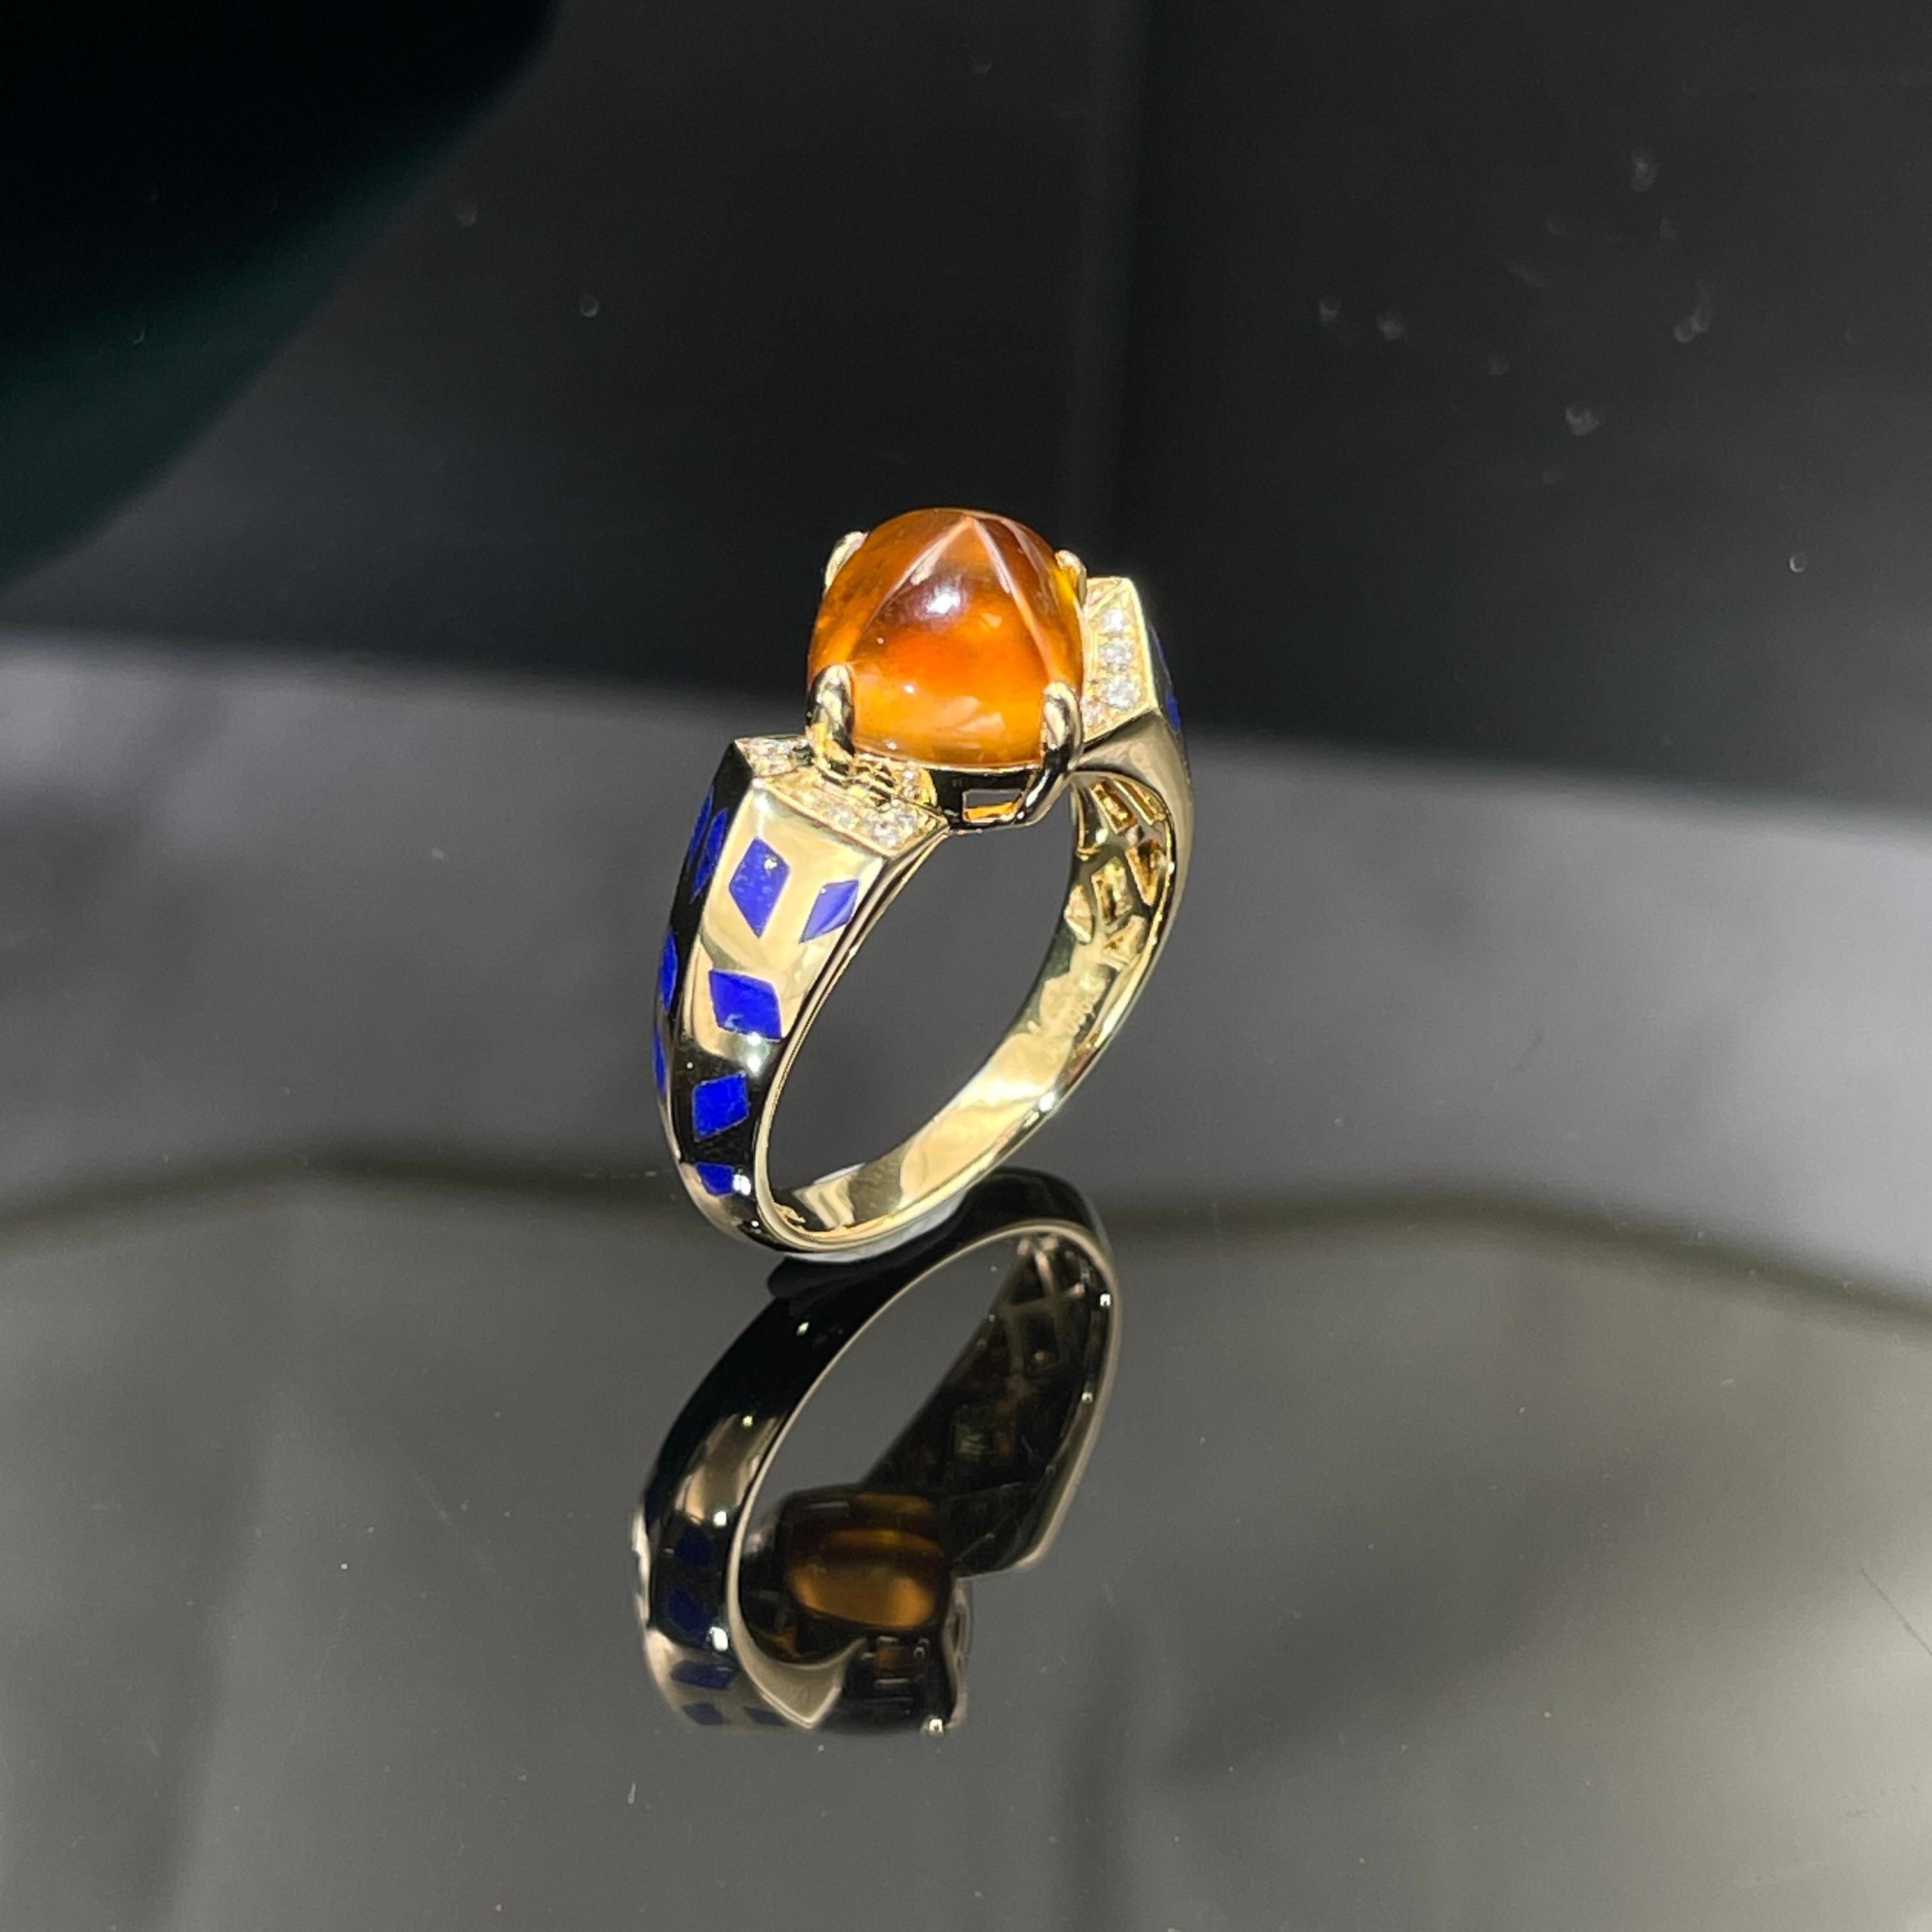 This is a sugarloaf ring inspired by Cartier sugarload collection. The Center stone is a Fanta Colour Spessartite Garnet sugarloaf secured by 4 18K Yellow Gold Claws. It is then descended into 2 geometric platform with diamond pave, followed by